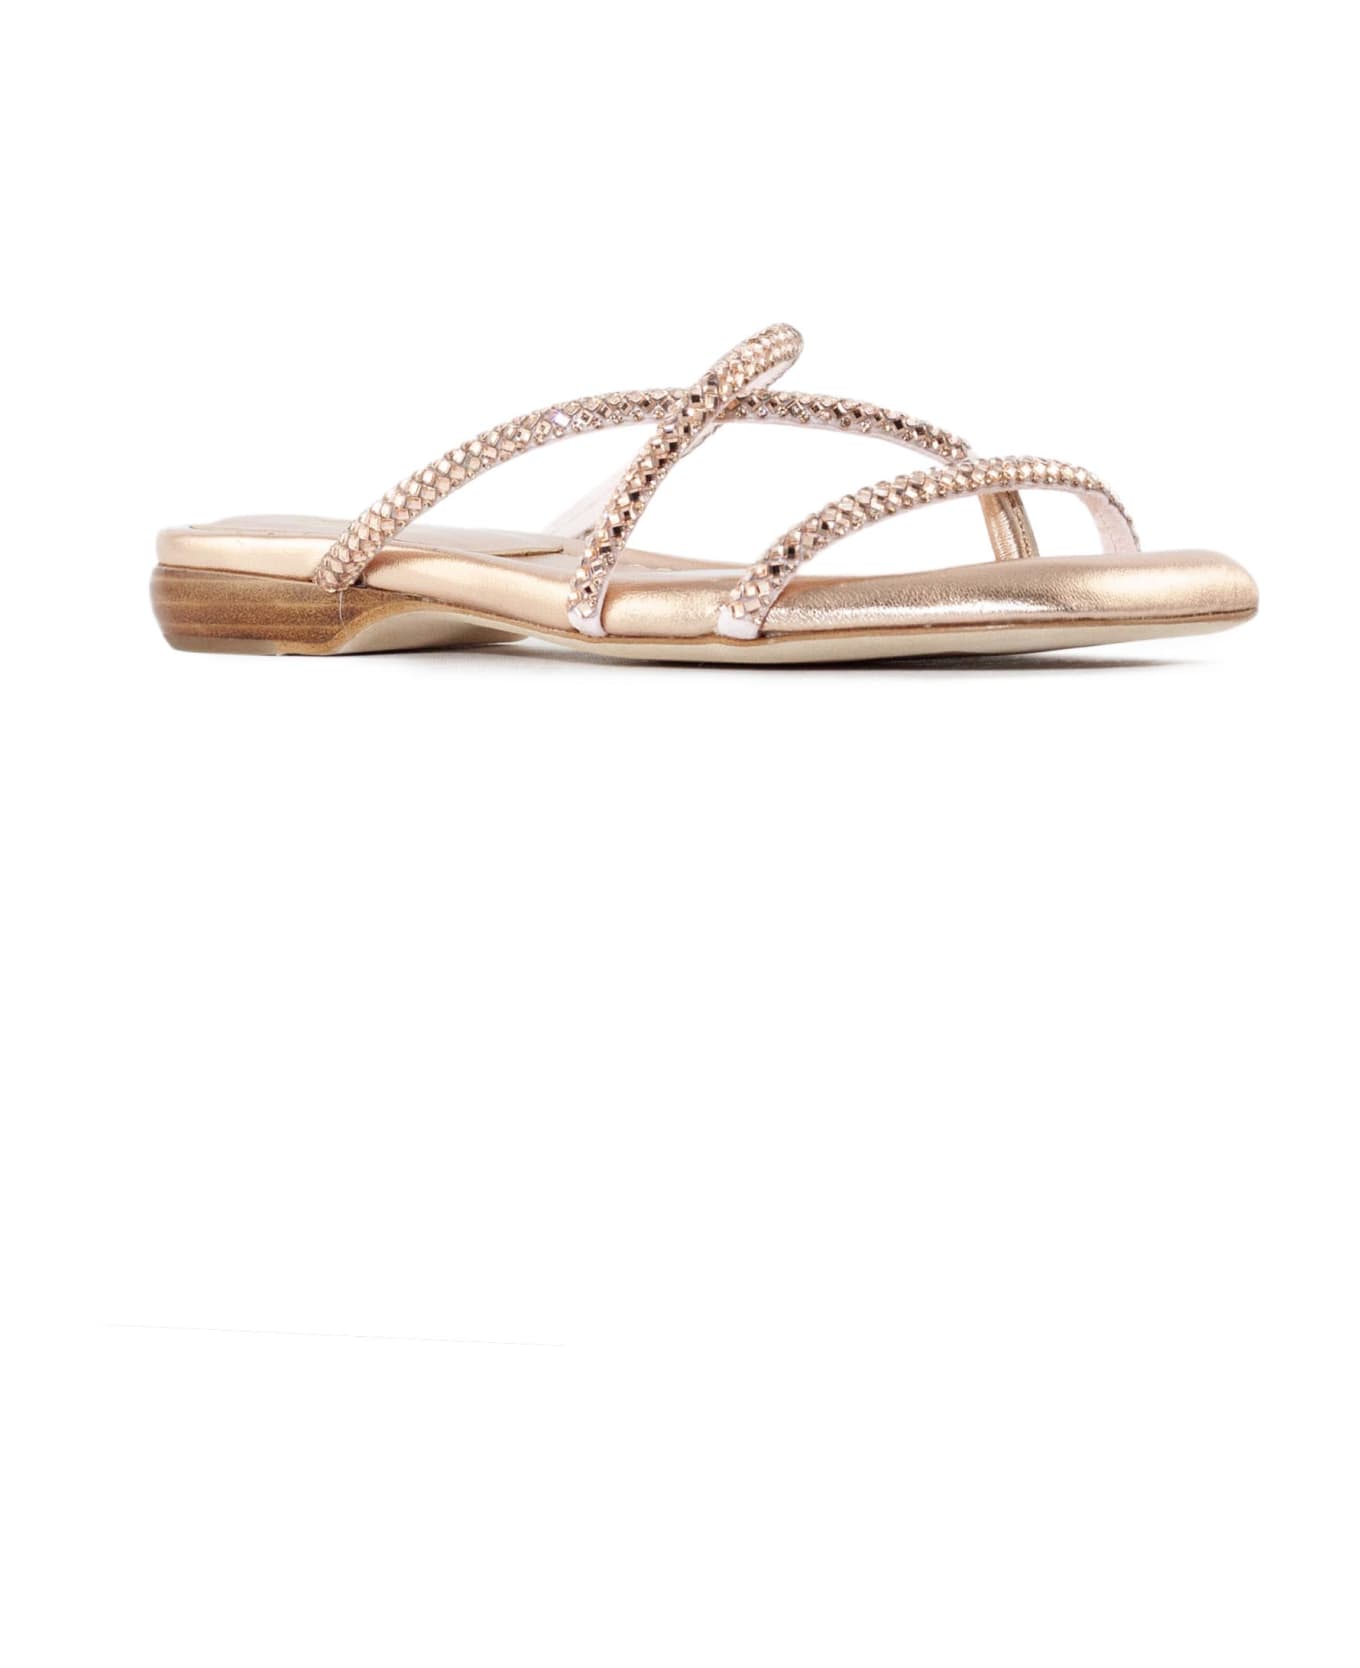 Ash Gold-tone Leather Rubis Low Sandals - Golden サンダル